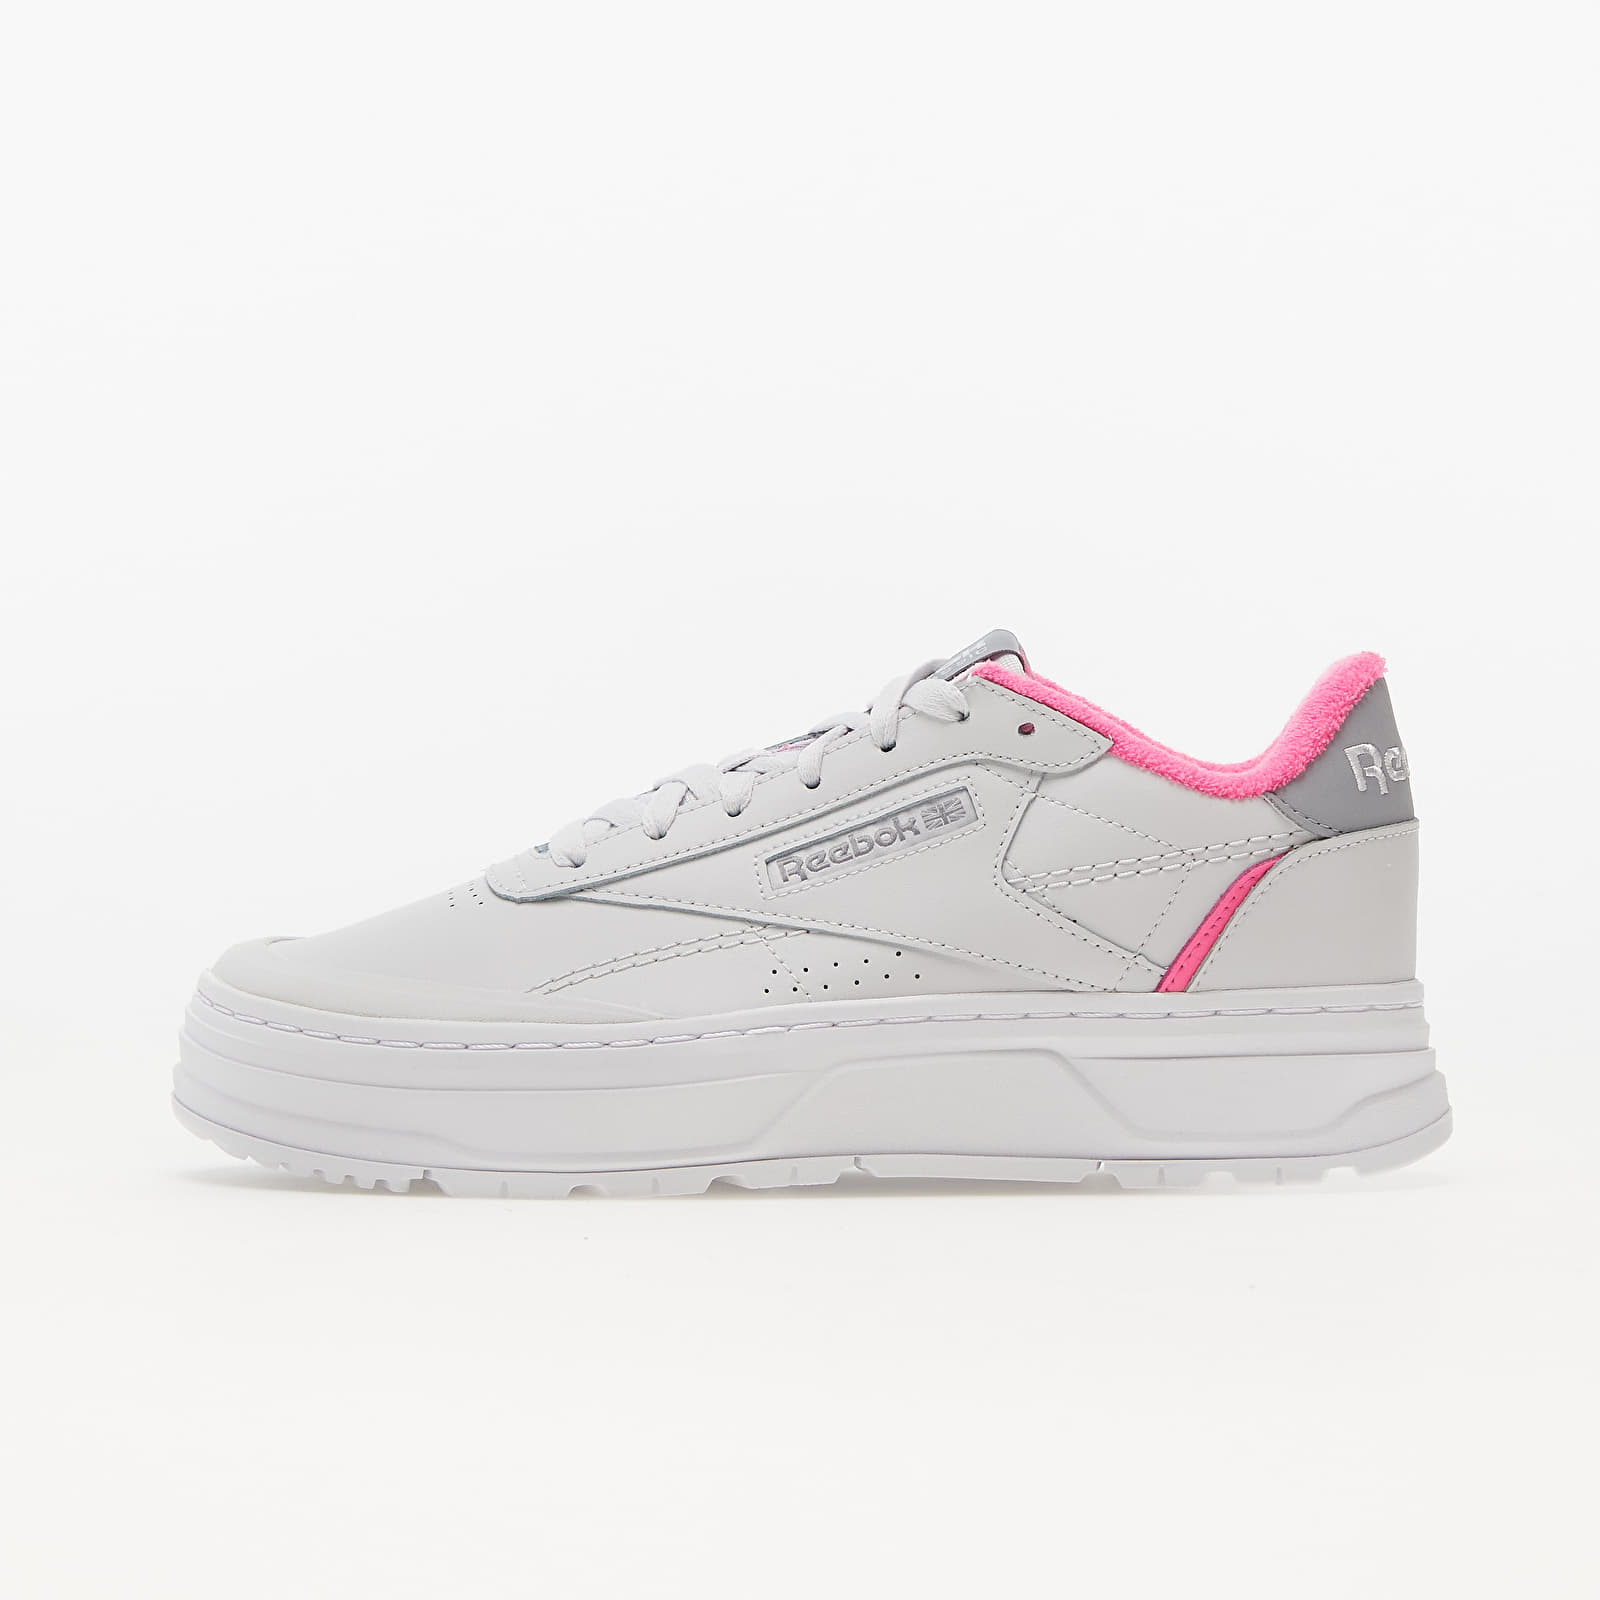 Women's shoes Reebok Club C Double GEO Cold Grey/ Cold Grey/ Atomic Pink